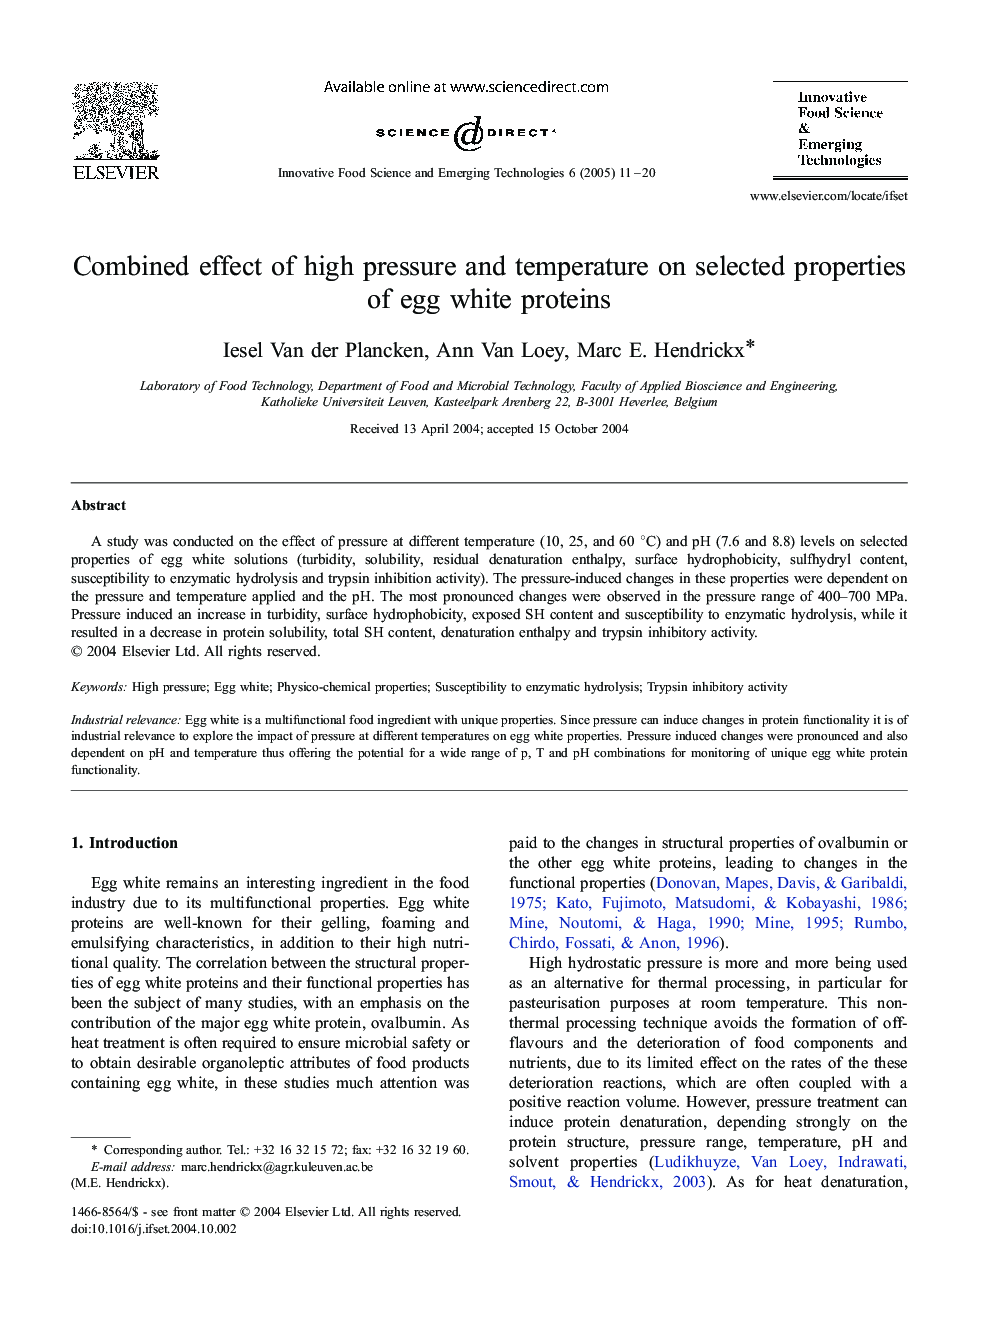 Combined effect of high pressure and temperature on selected properties of egg white proteins